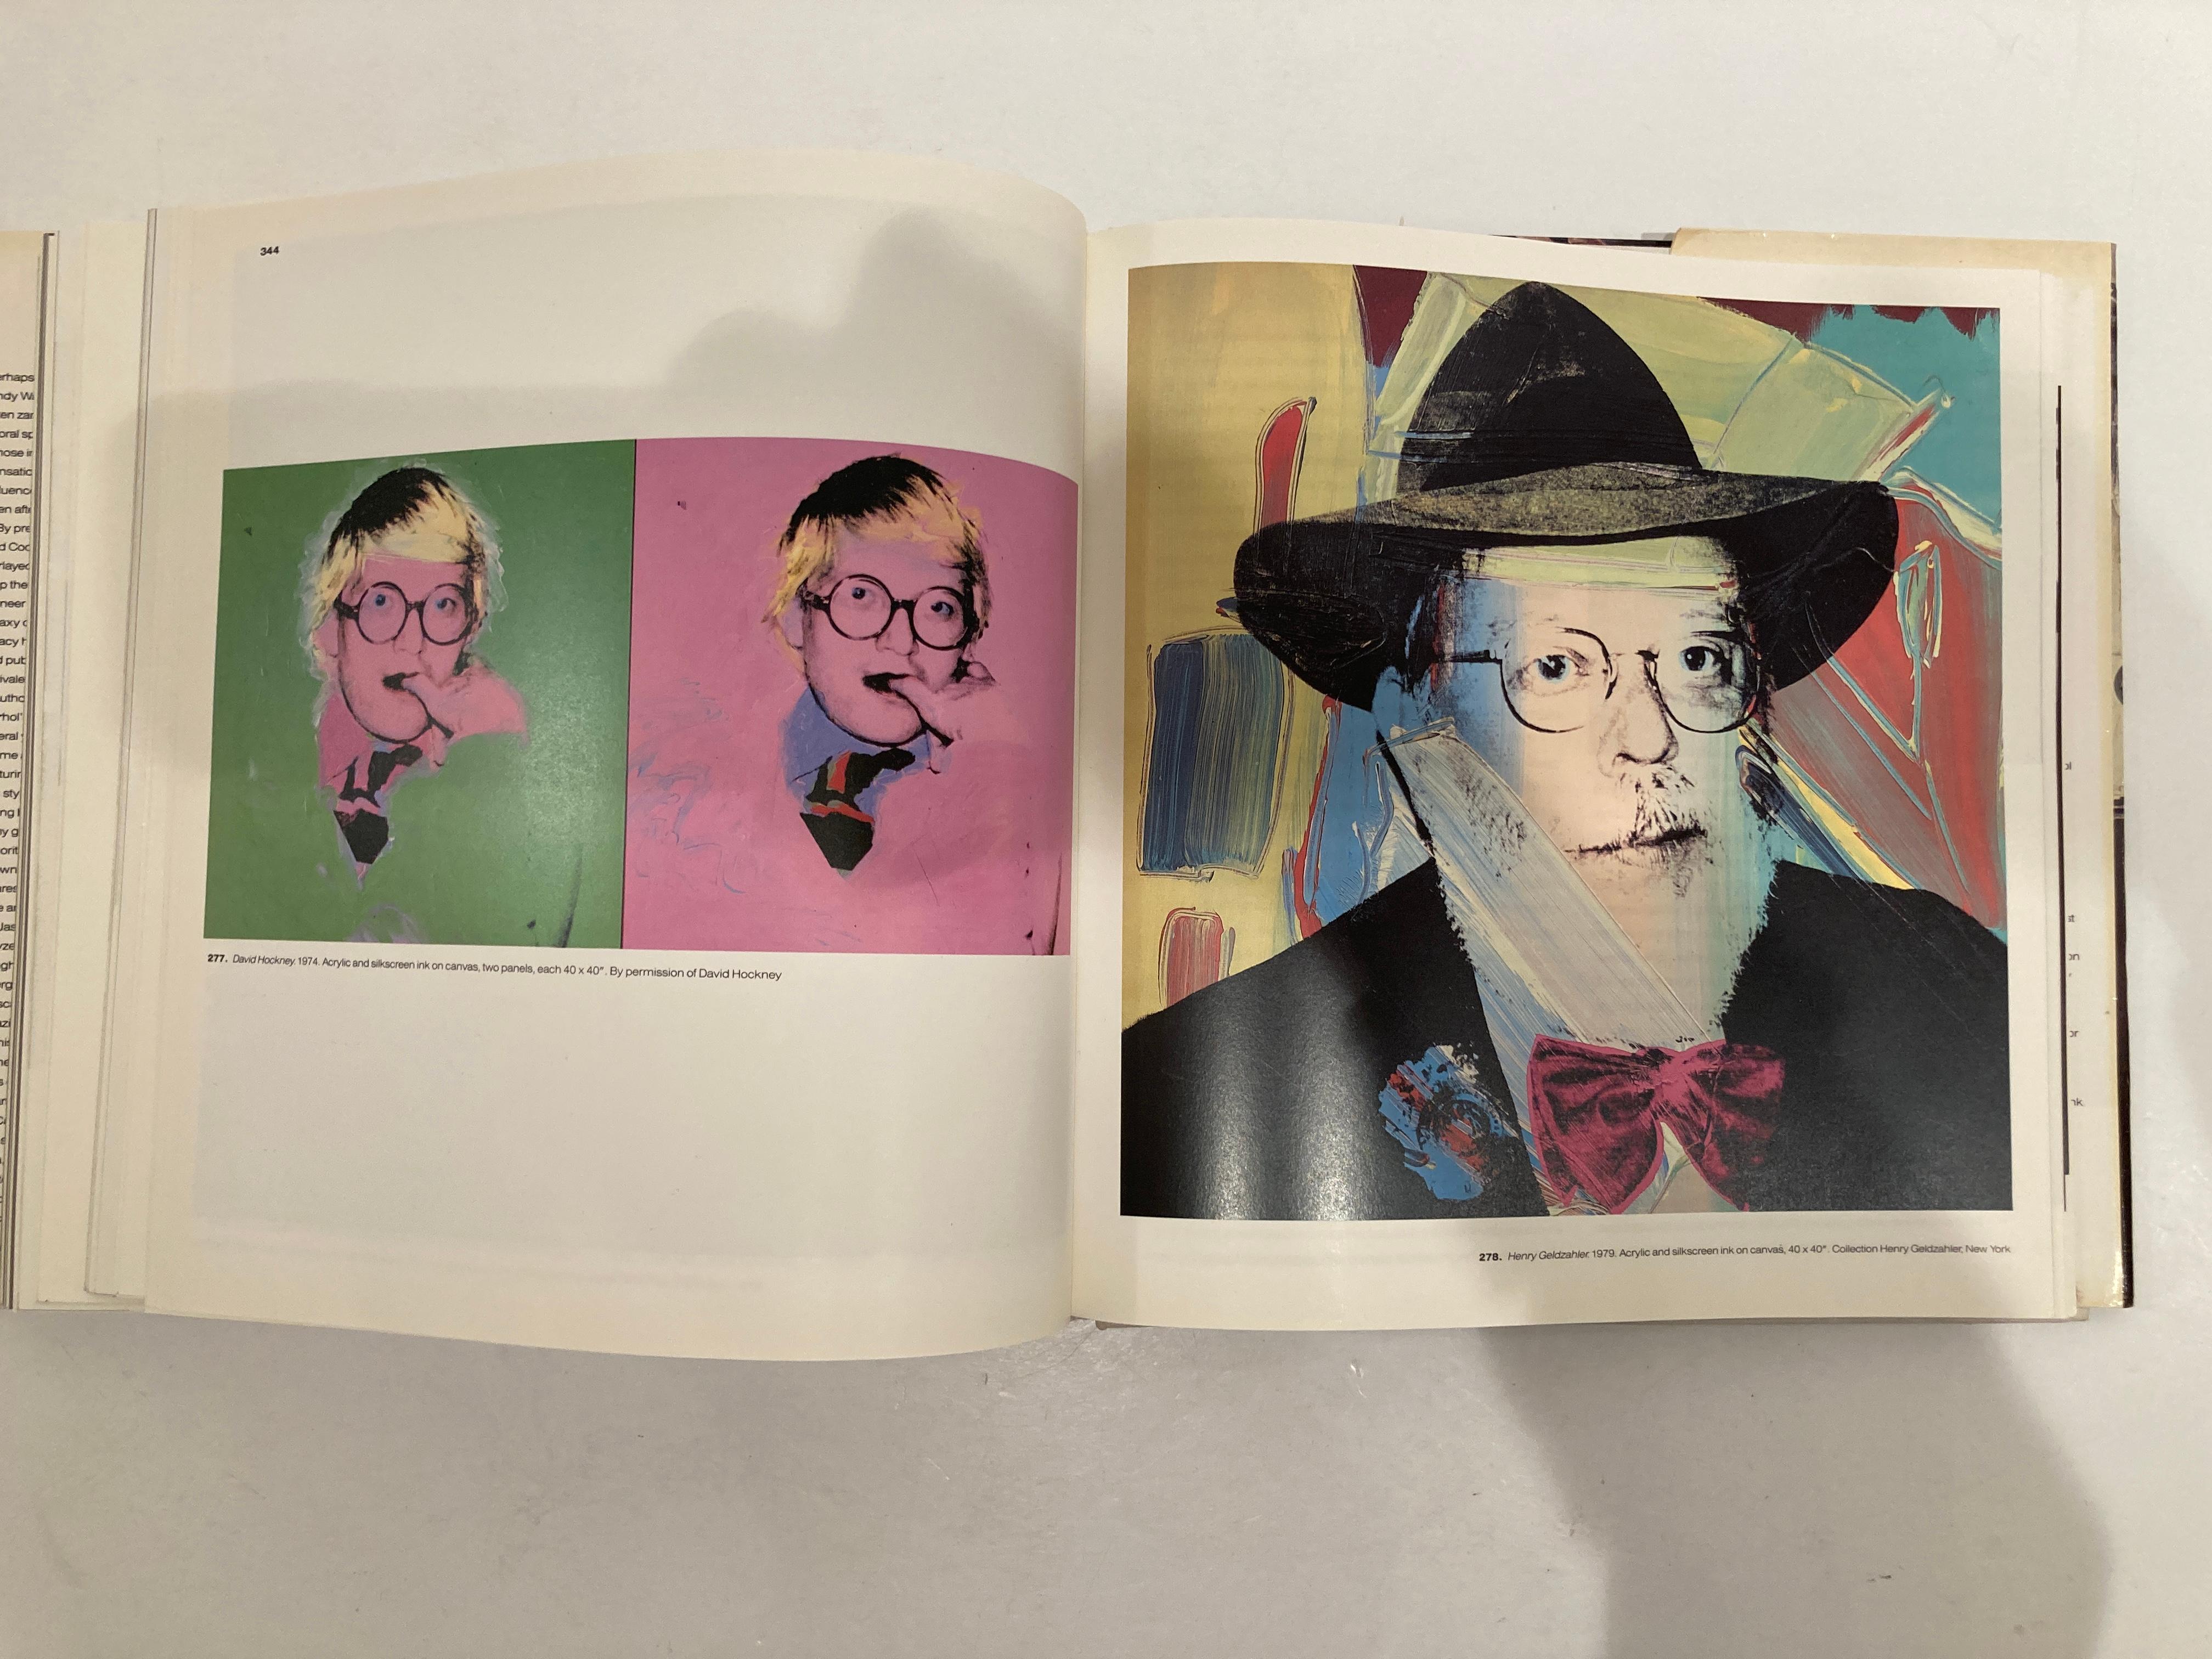 Andy Warhol by David Bourdon Collectible Poster Art Book Vintage, 1989 For Sale 8